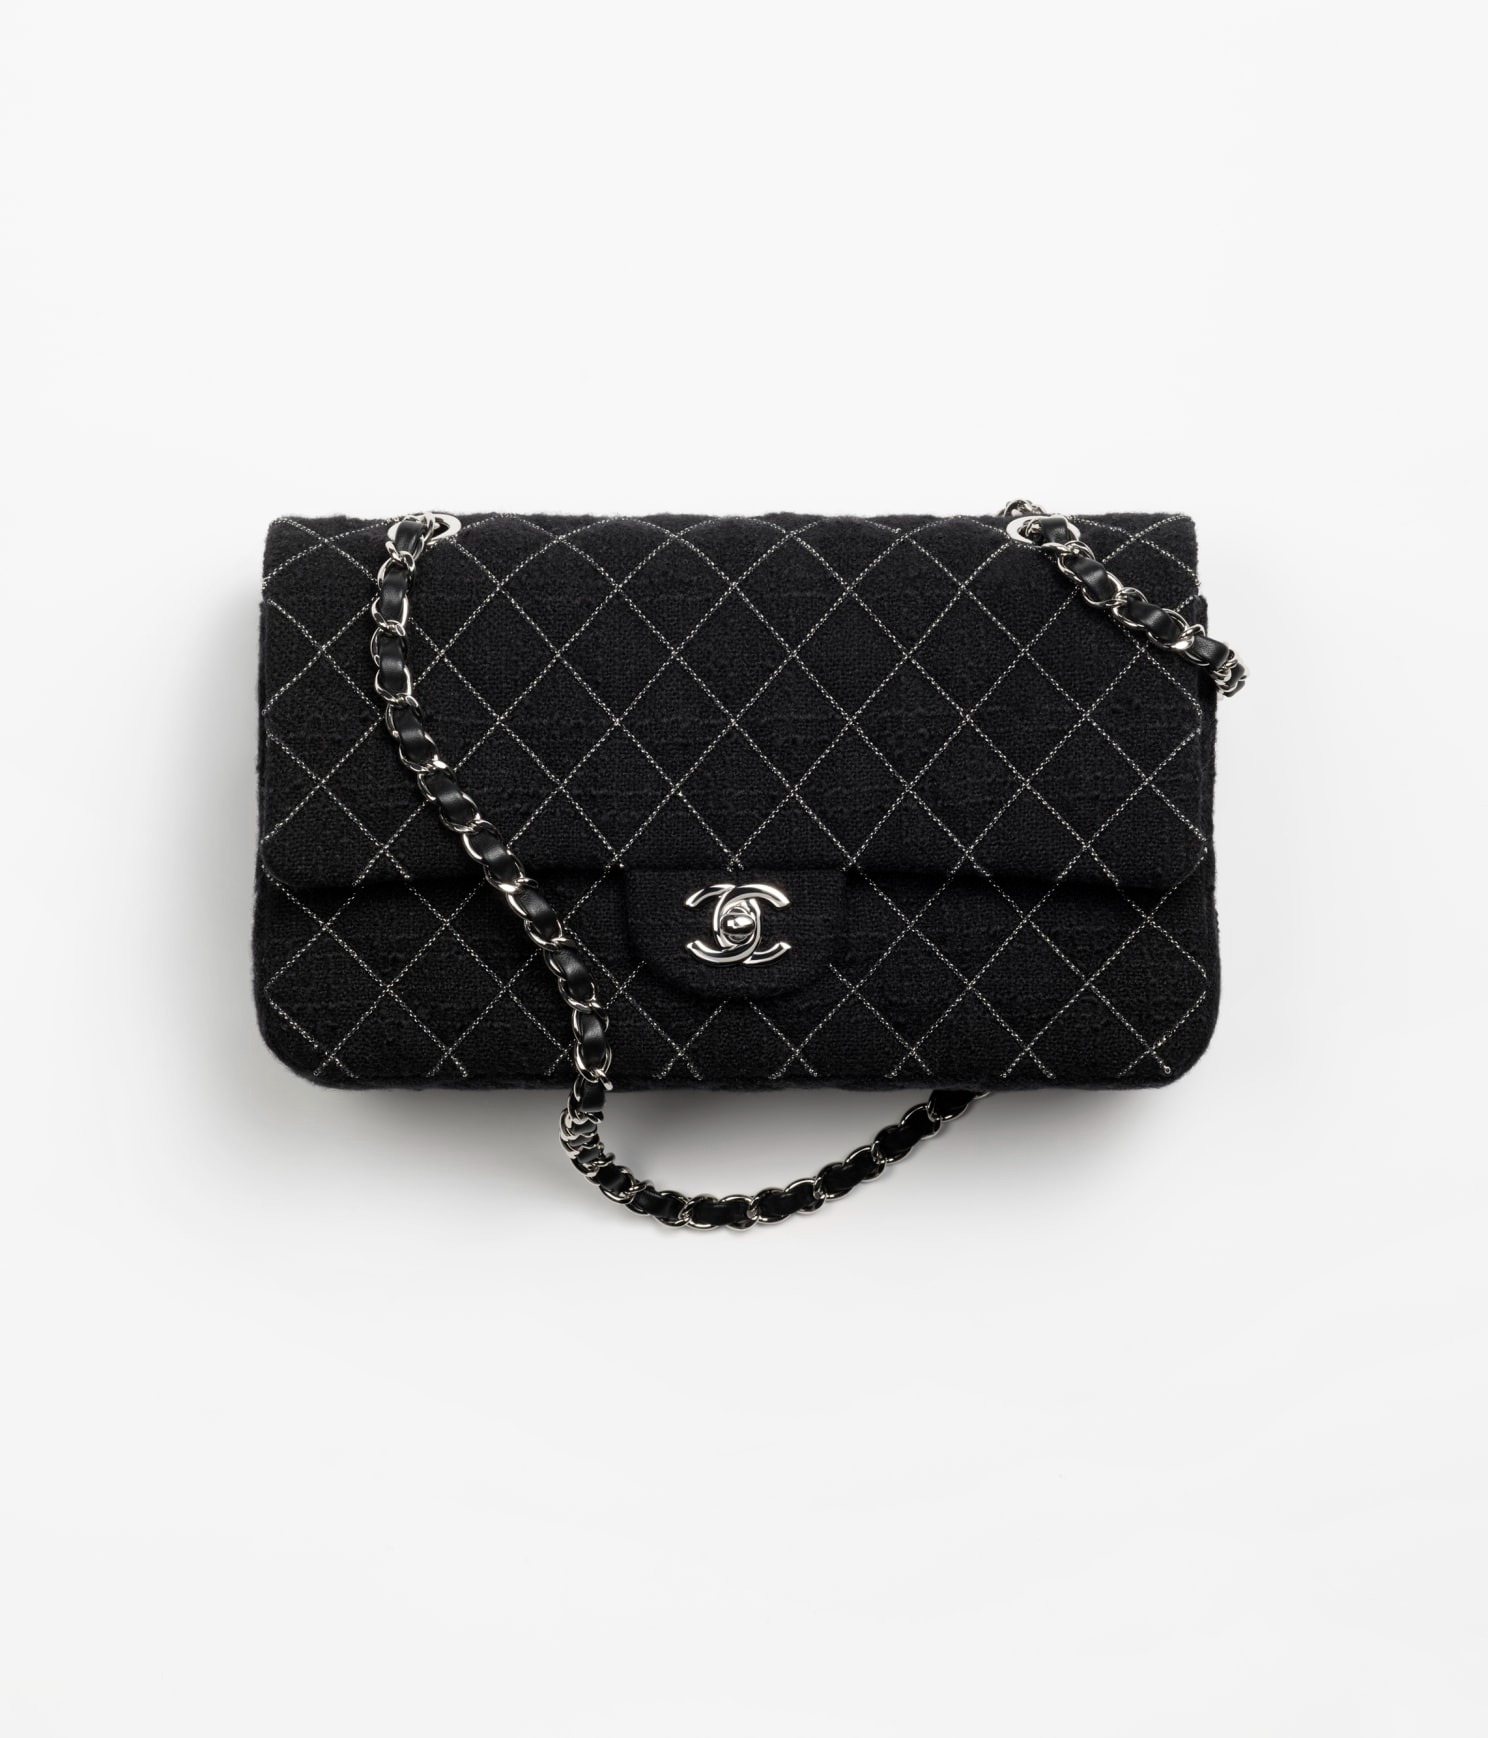 All the Chanel Accessories Dropping Next Season